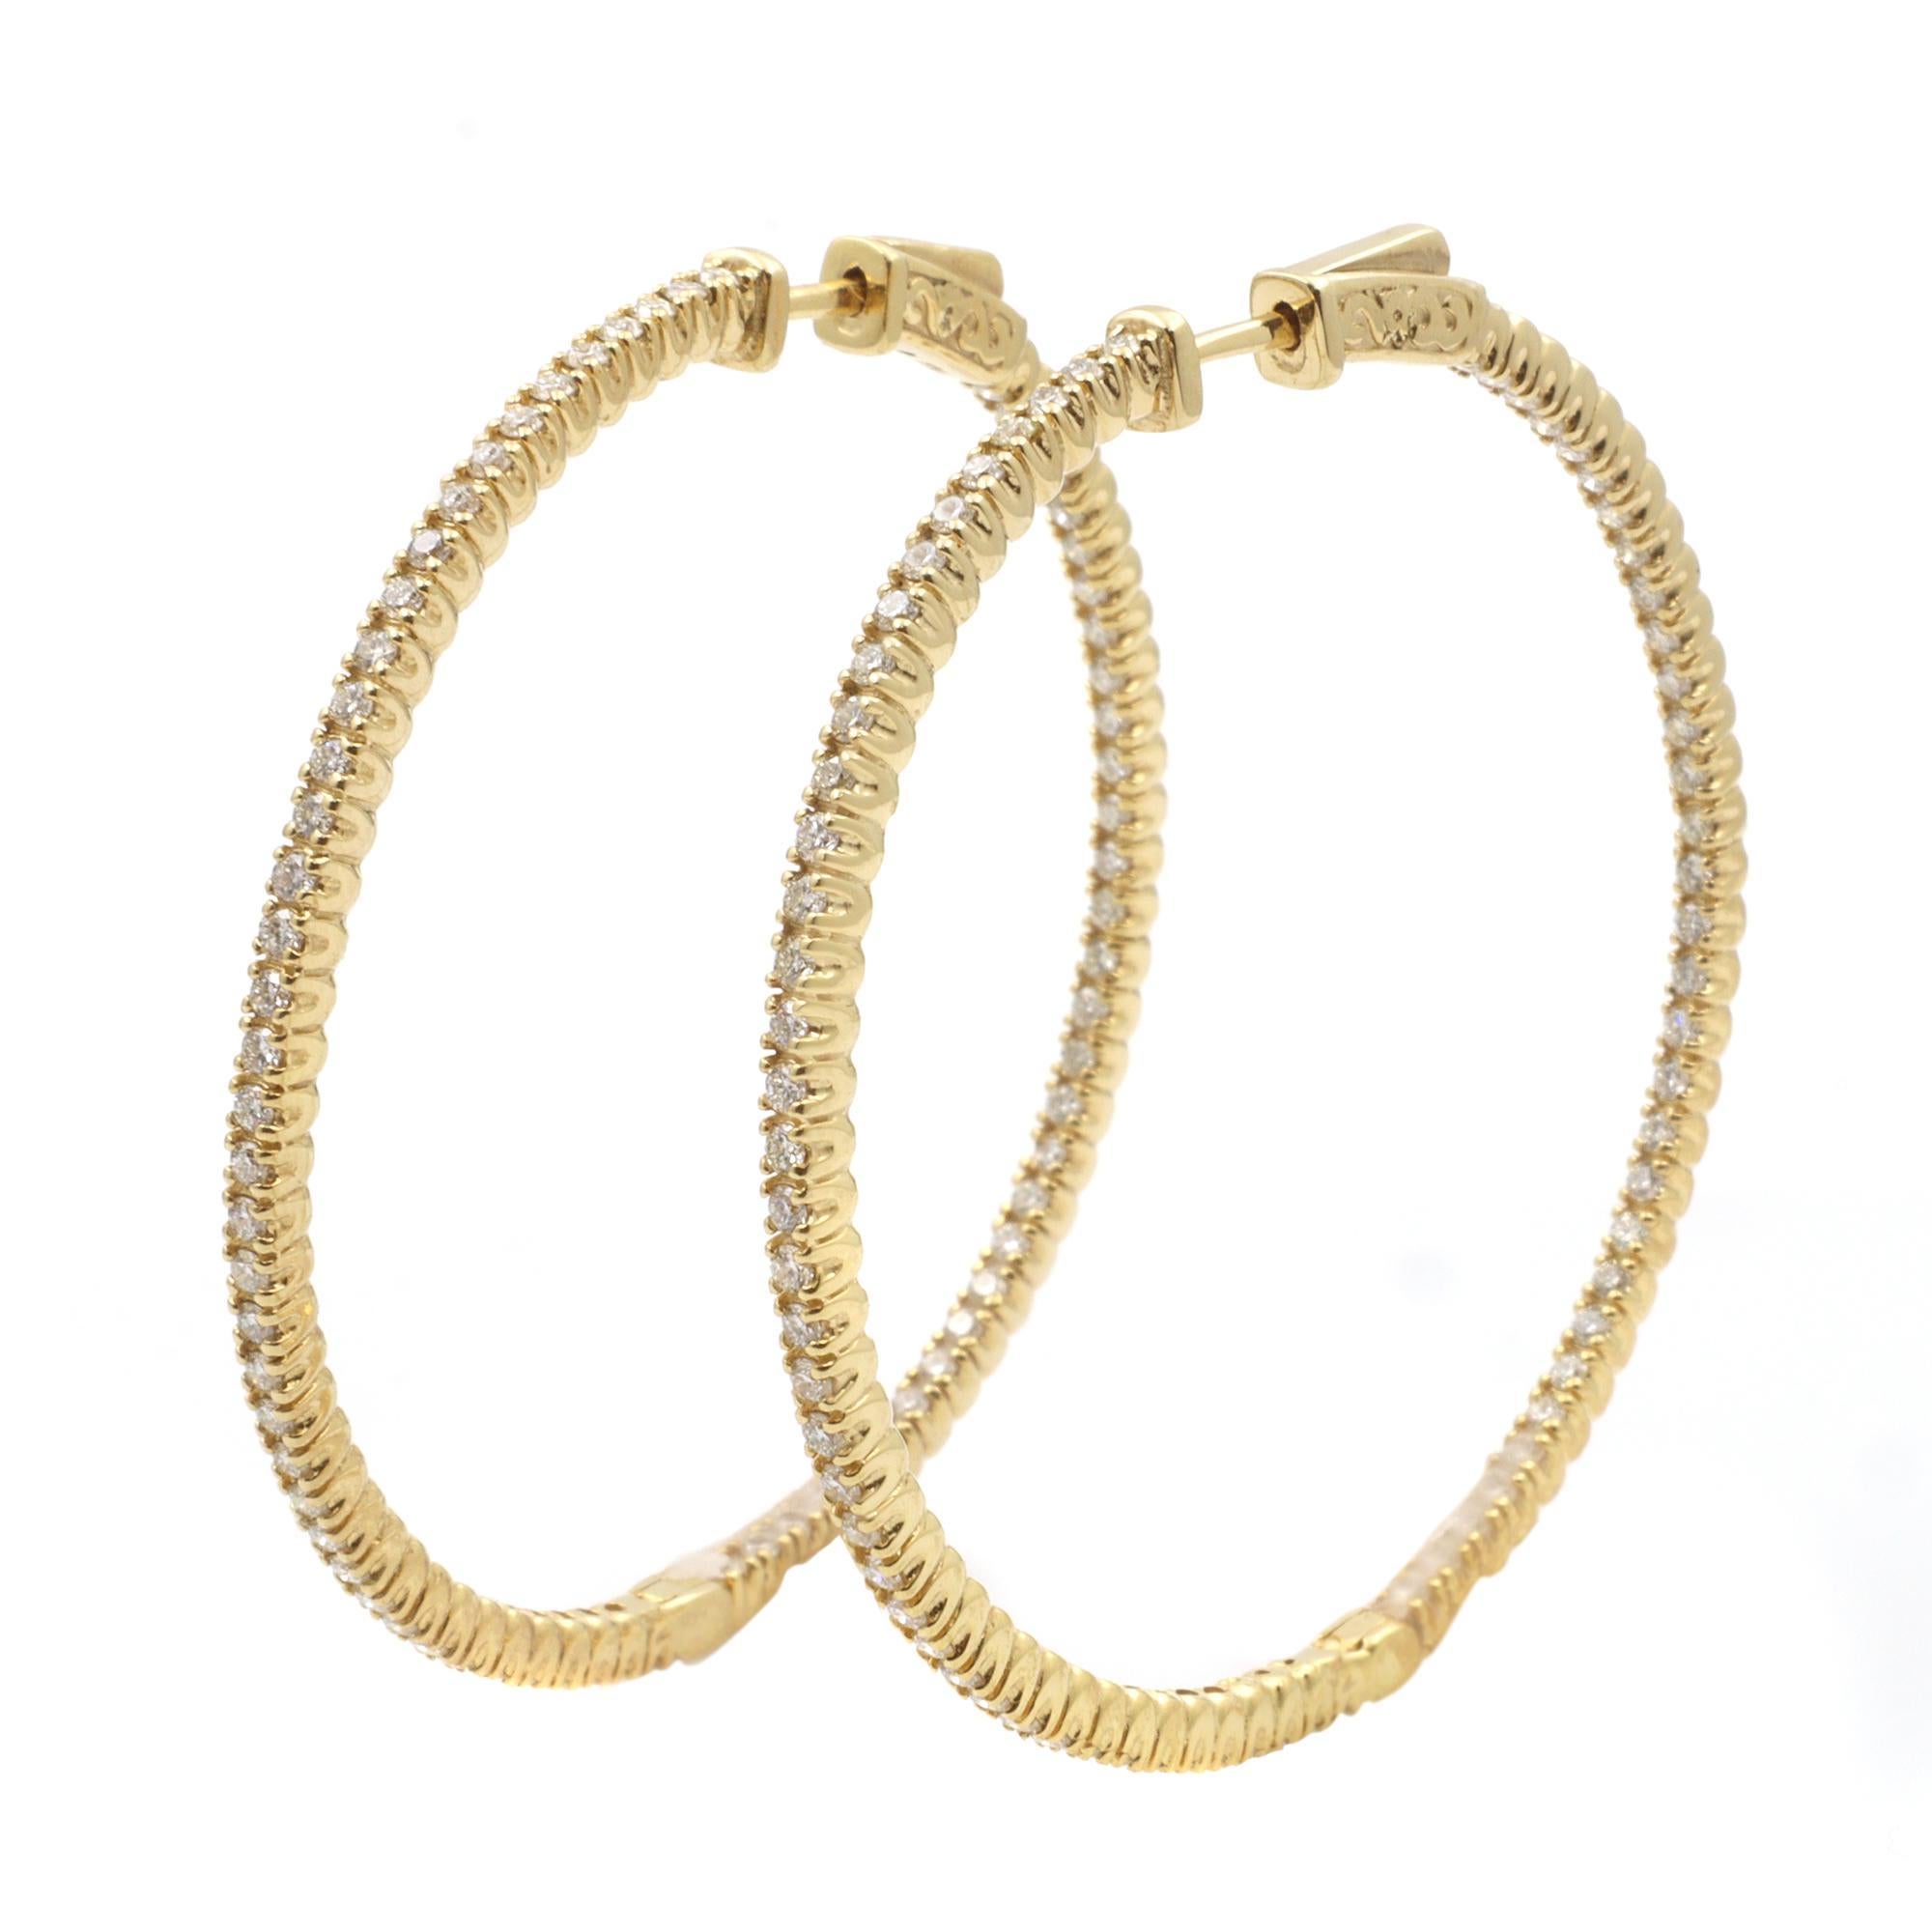 These stylish and elegant 14k yellow gold hoop earrings feature prong-set round diamonds in a single line. The diamonds embellish these earrings on the inside and the outside, offering a dazzling look from every angle. Total carat weight 1.75cttw.